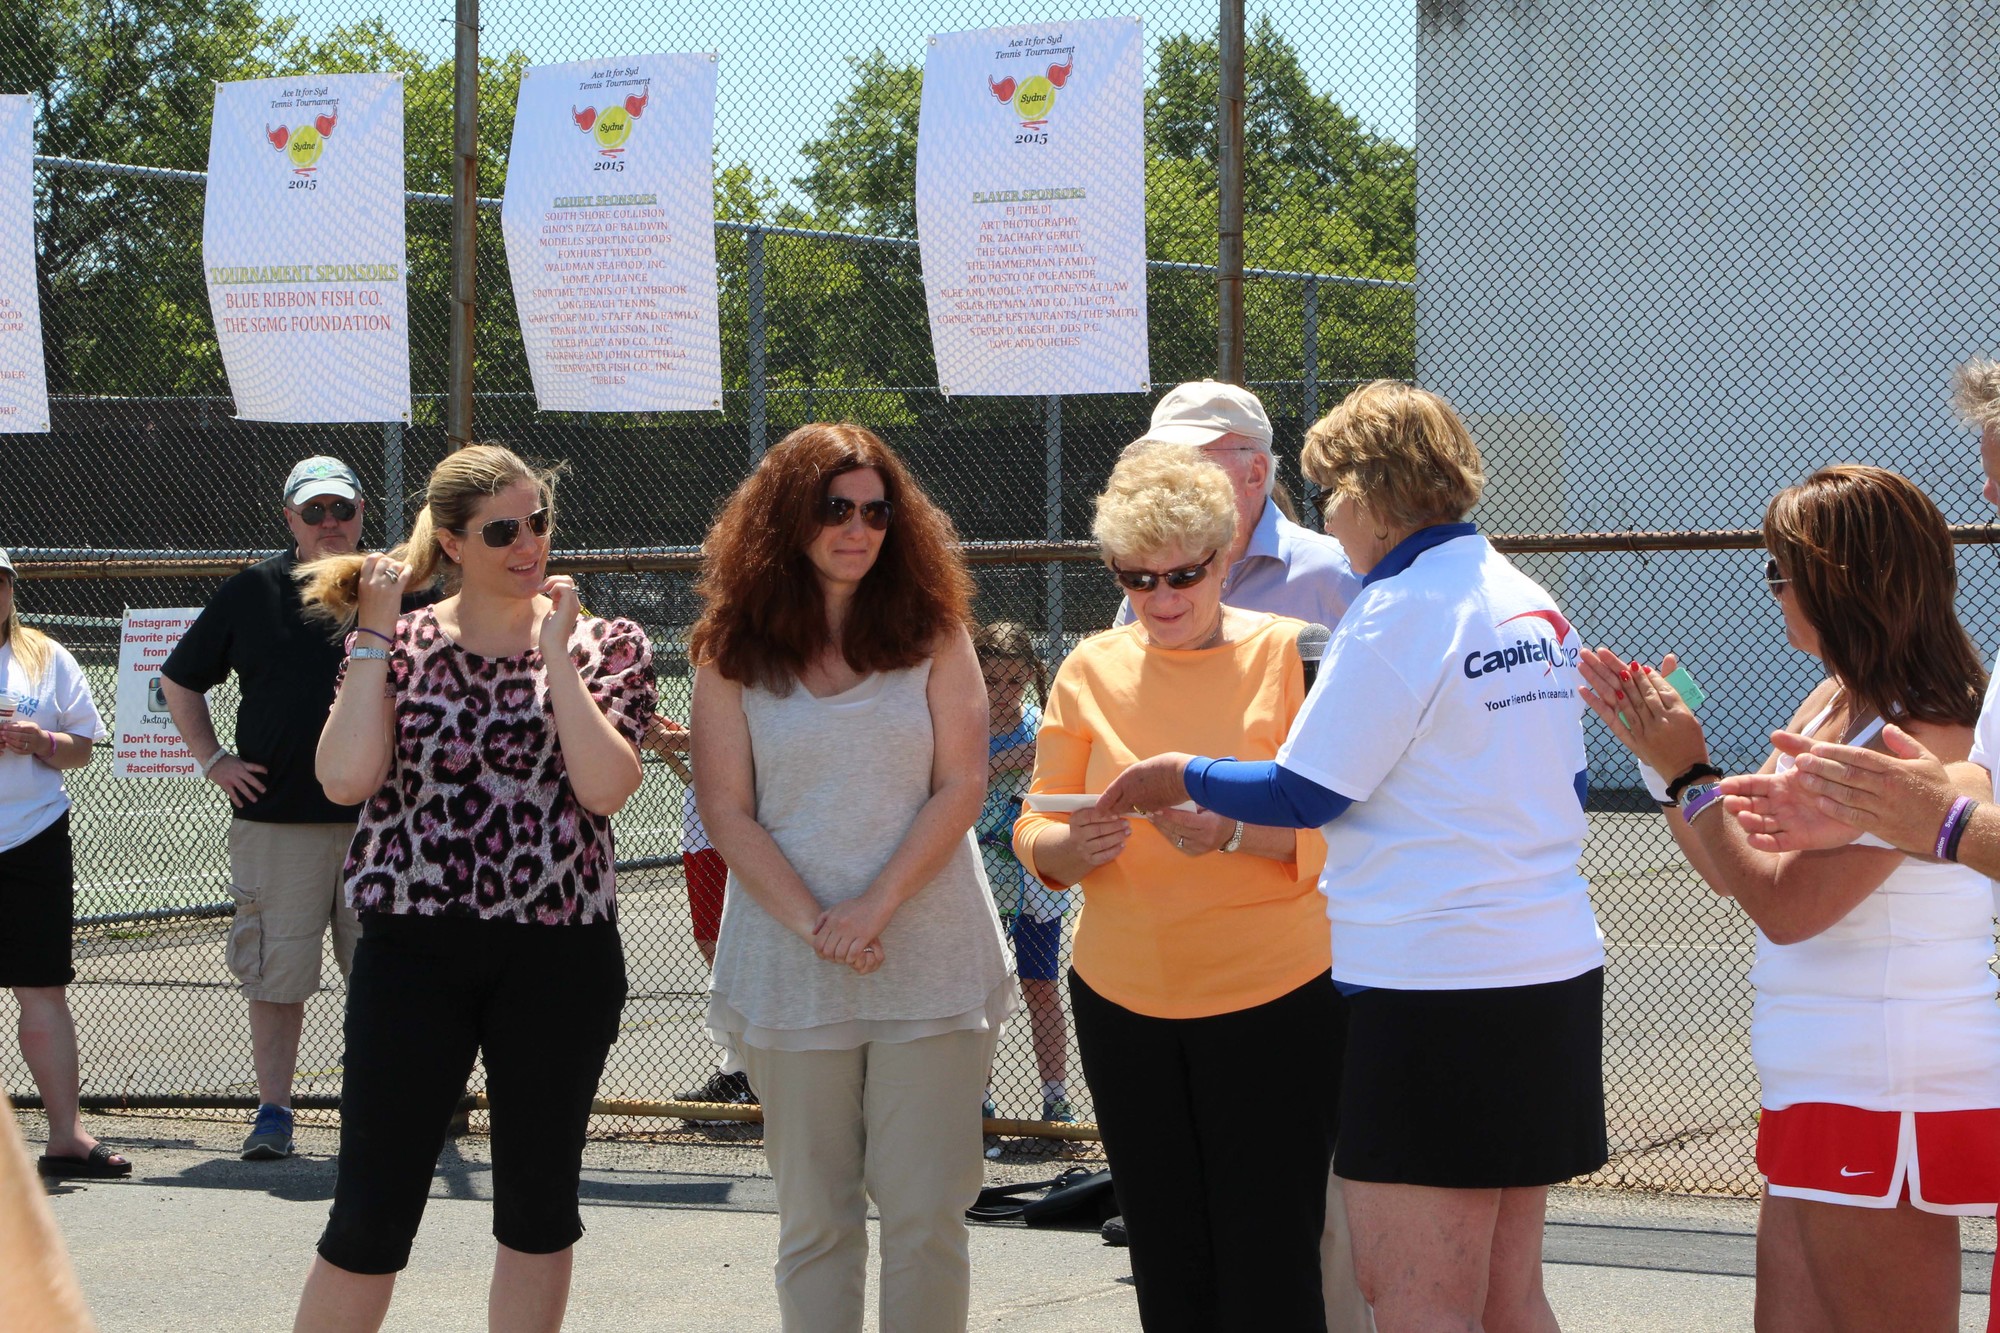 Susan Aldy’s family, Debbie Semaya, Rachel Renkin and Judy Weiss, accepted a presentation in her memory.